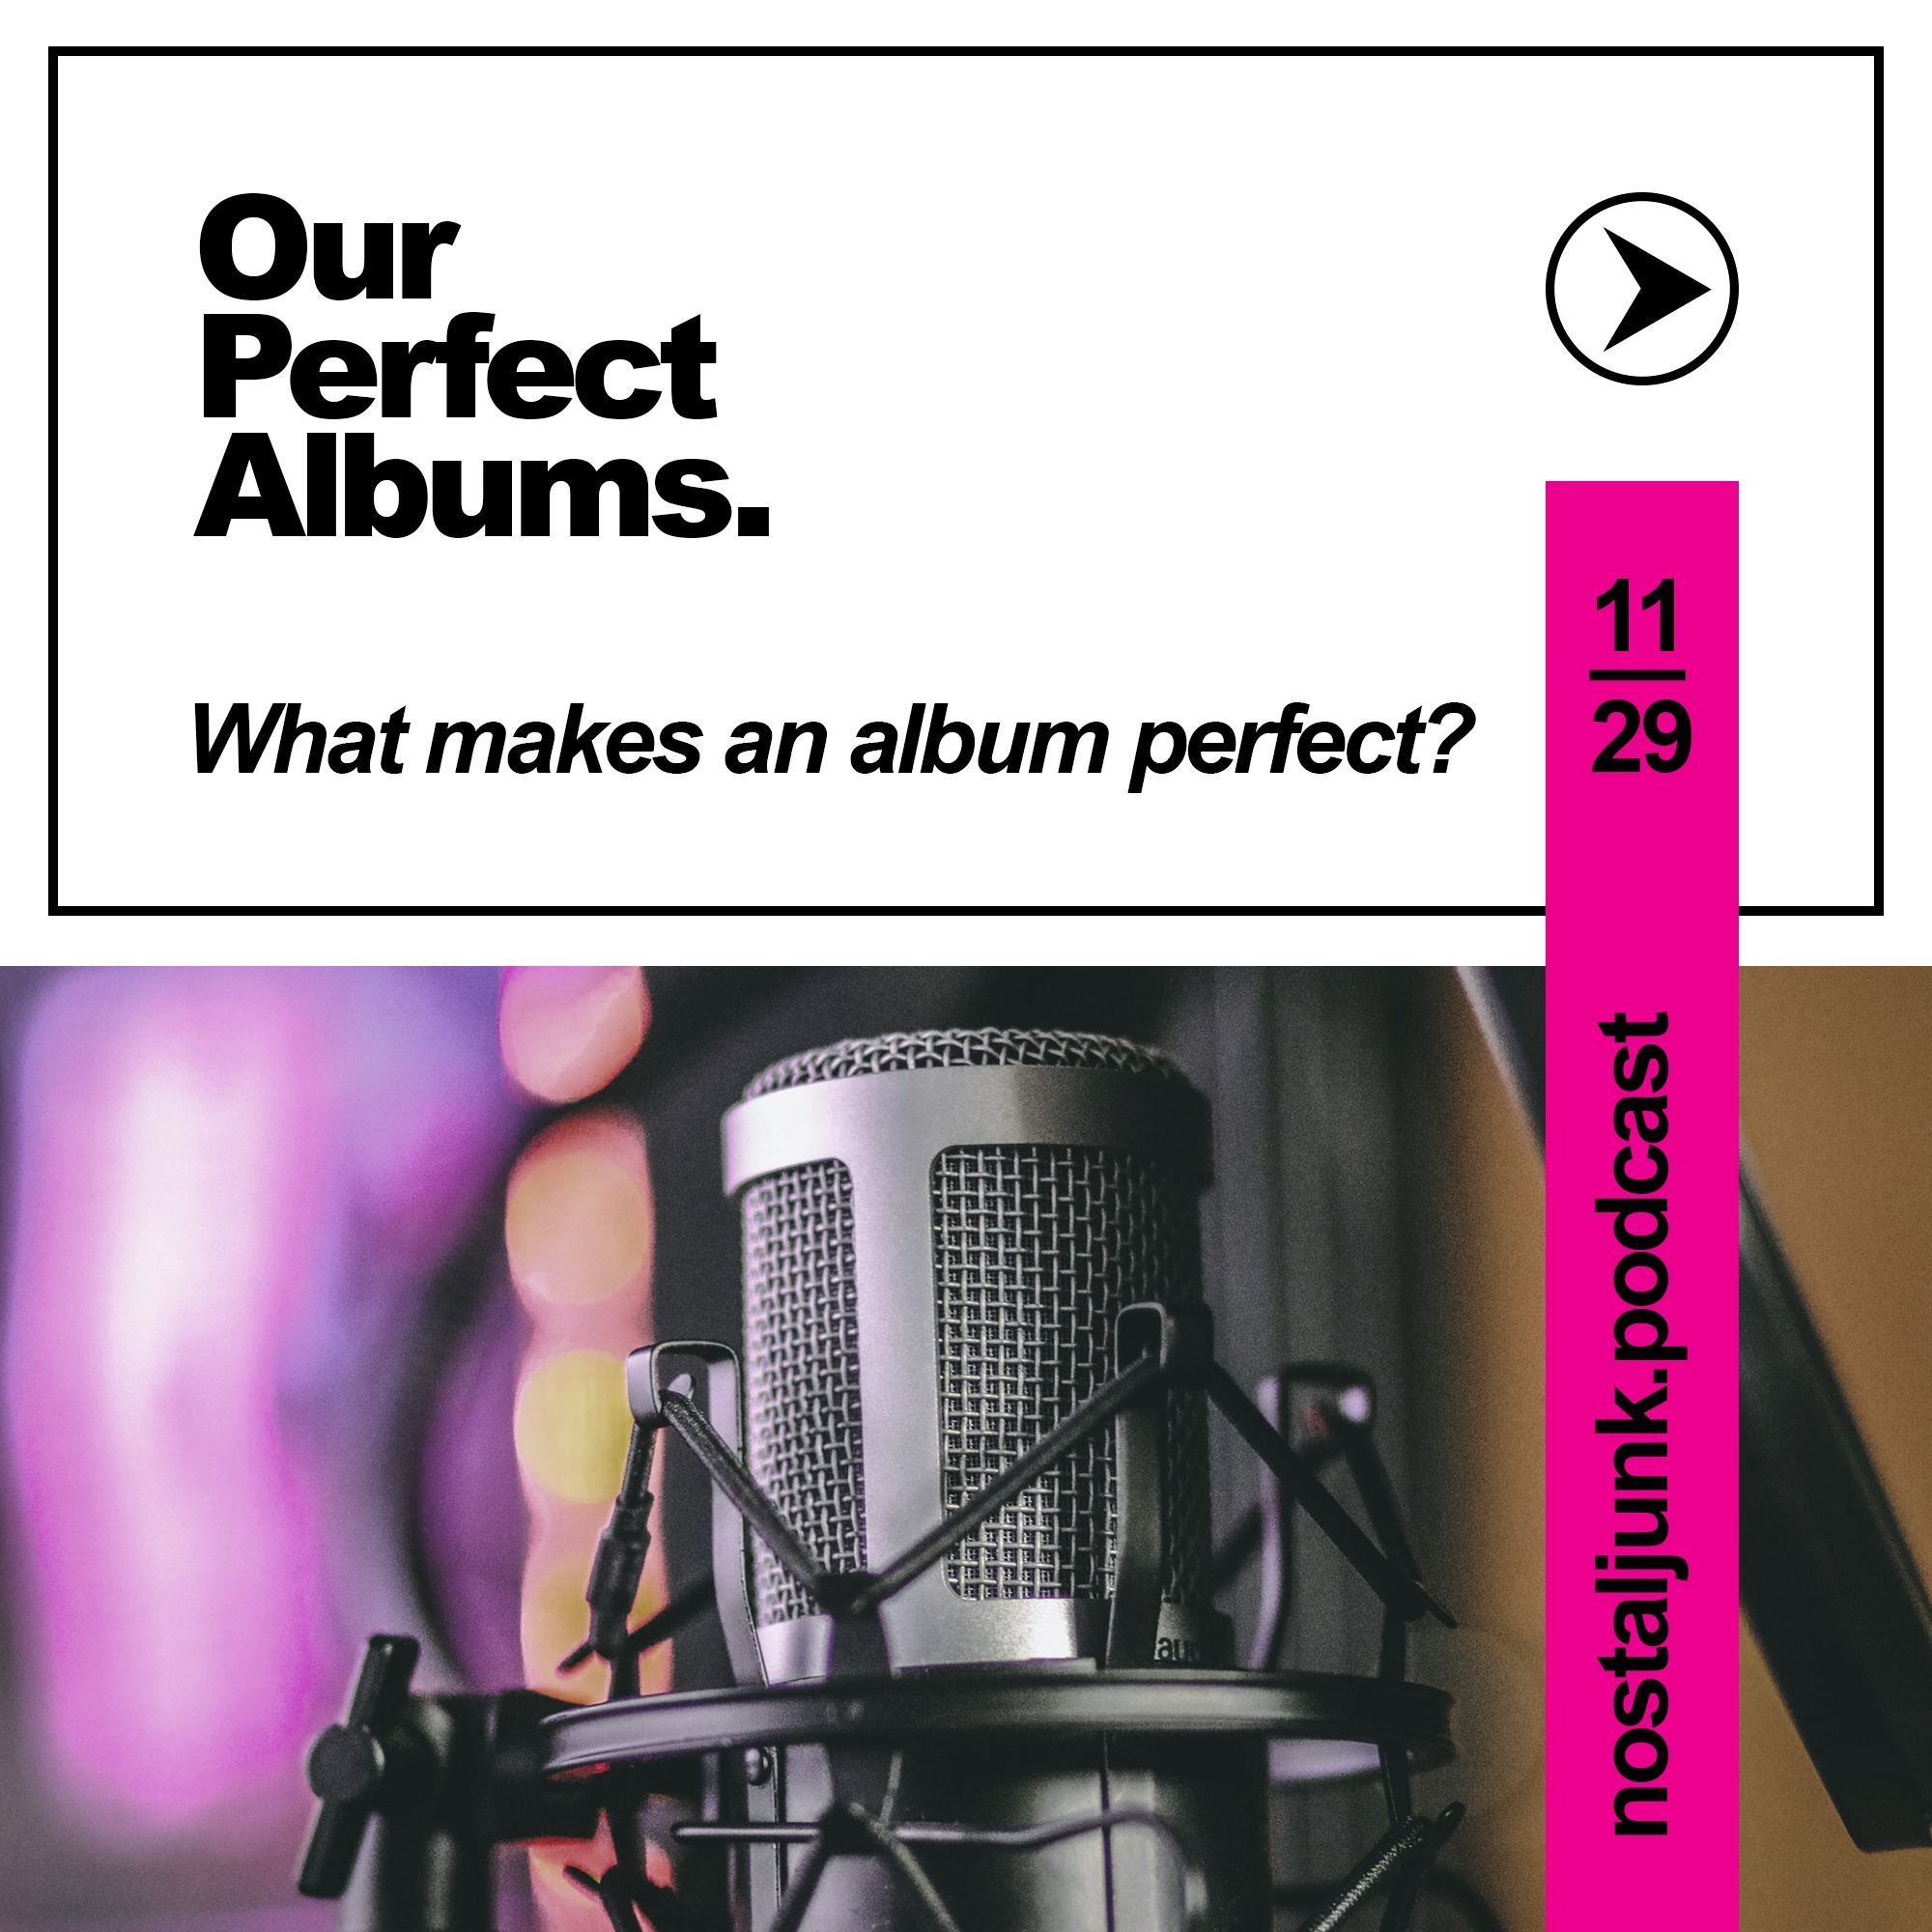 Our Perfect Albums Image